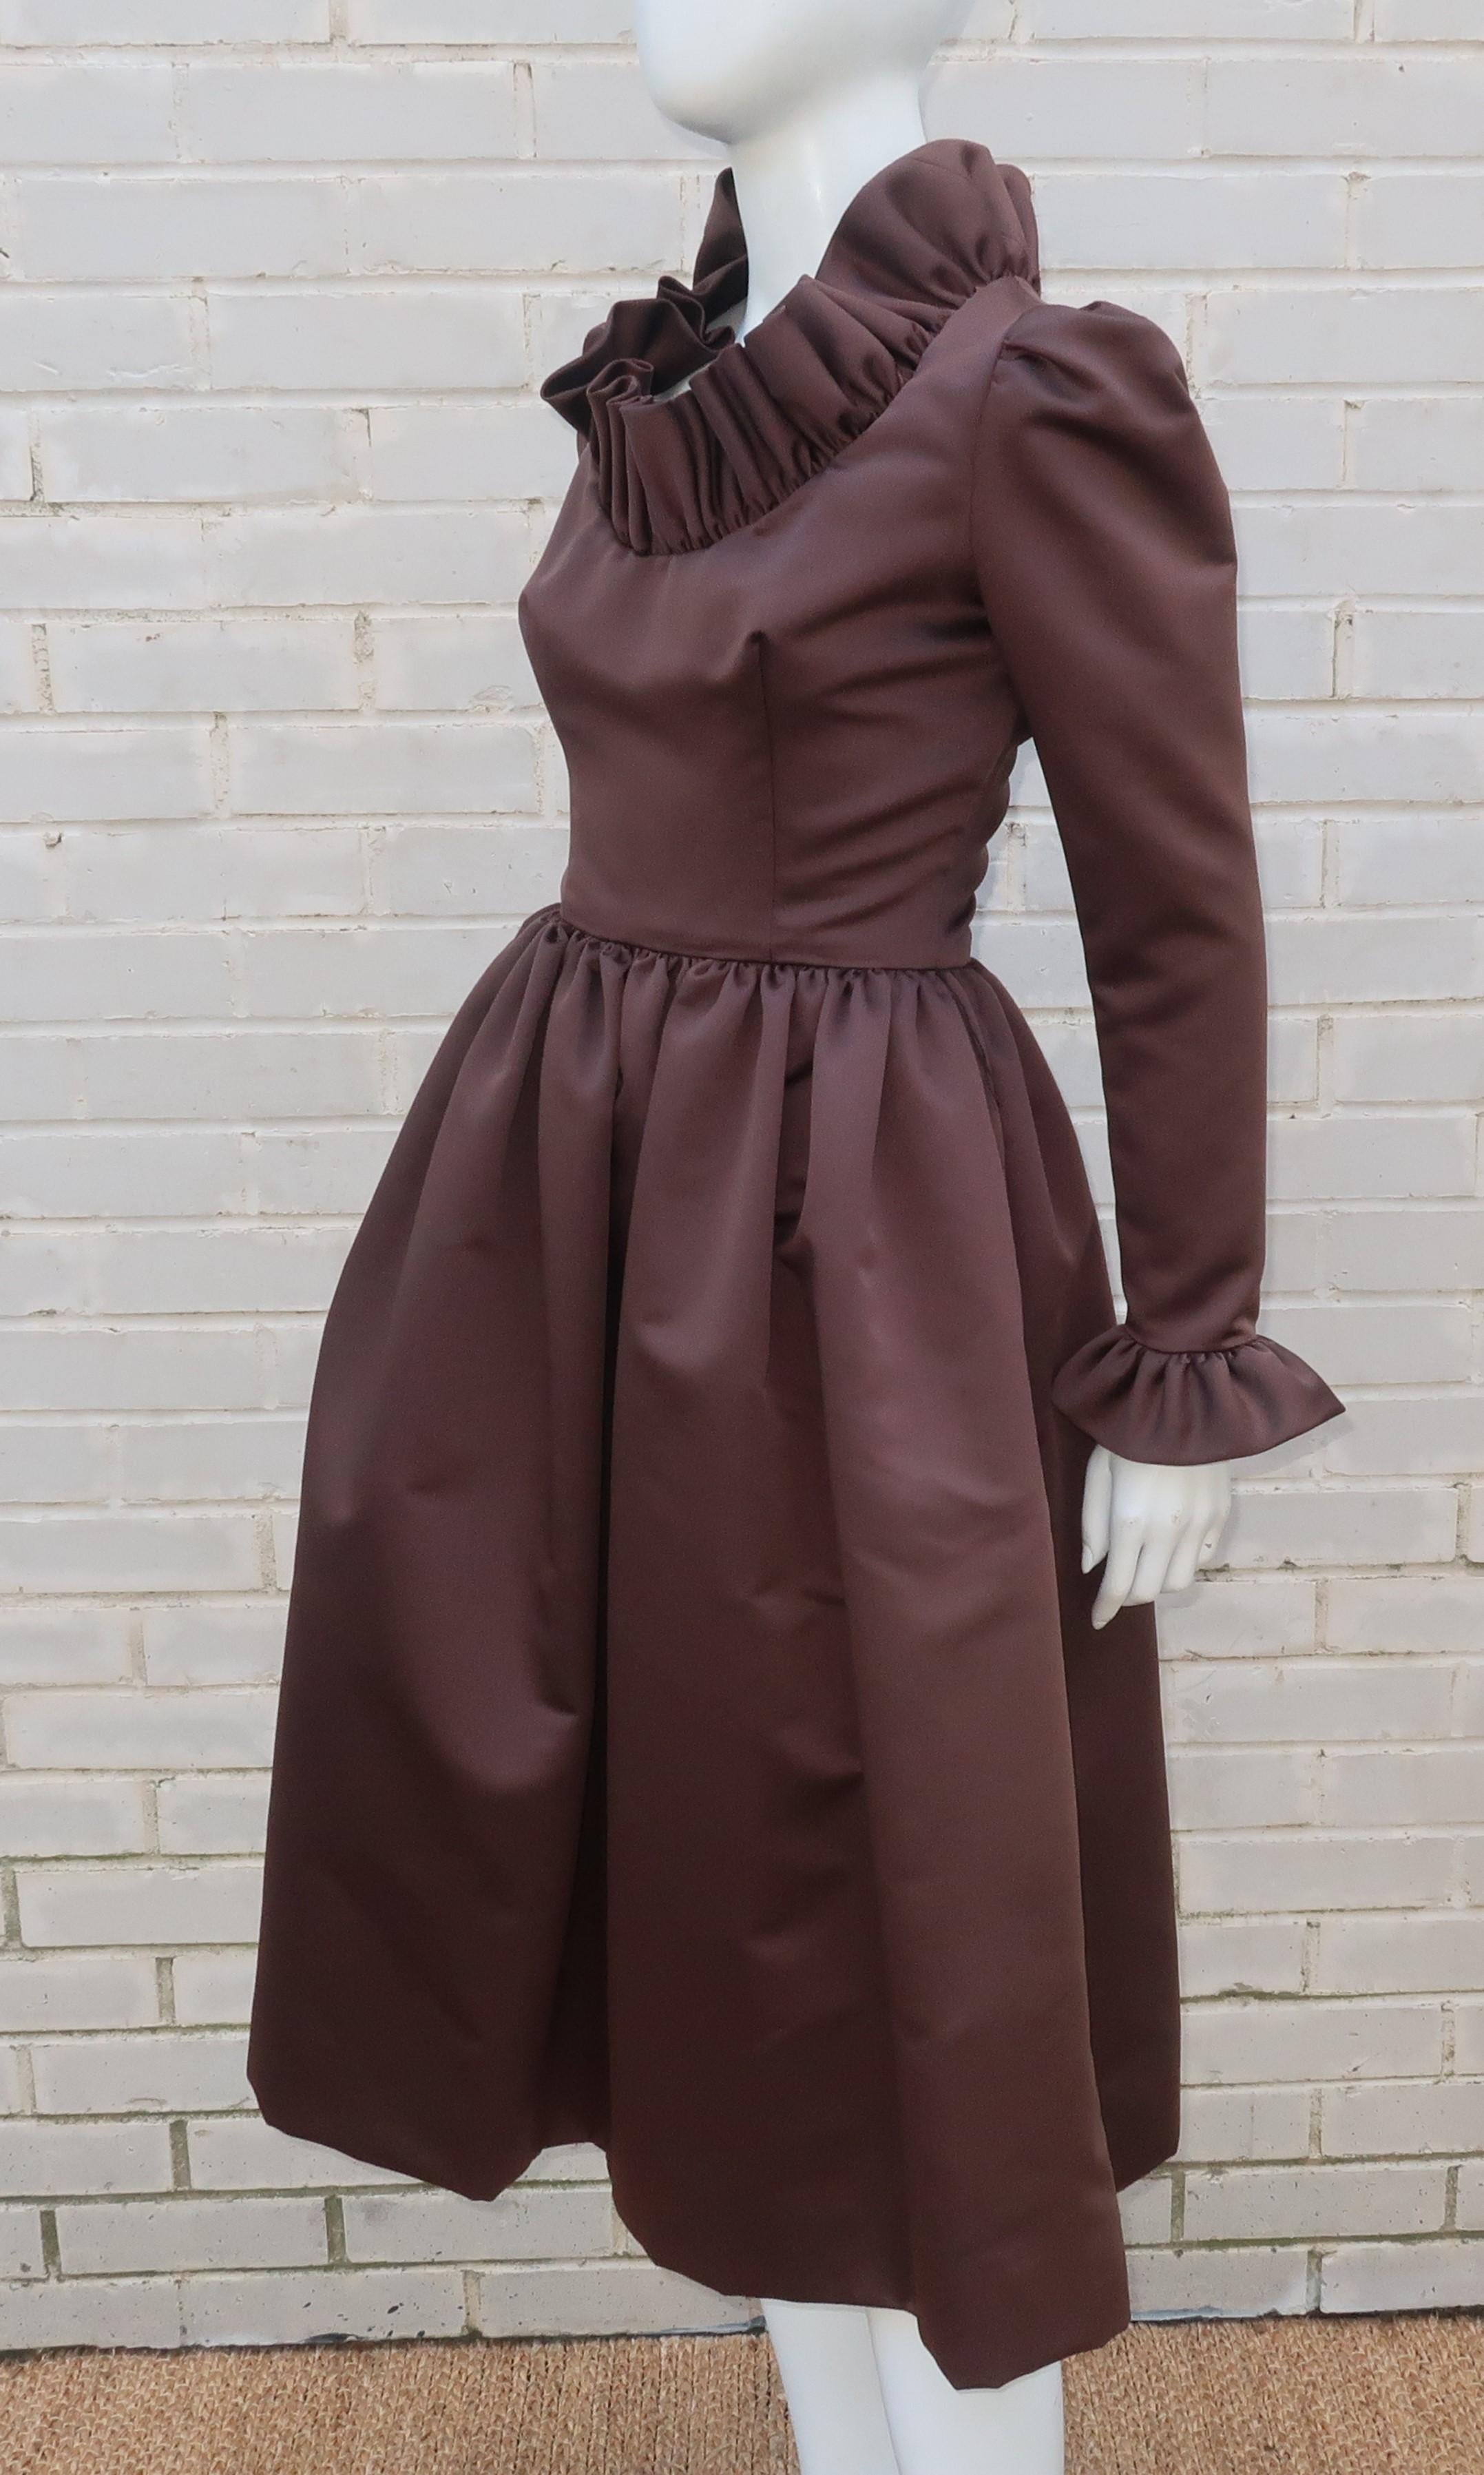 Jill Richards Brown Satin Ruffled Cocktail Dress, 1970's For Sale 2